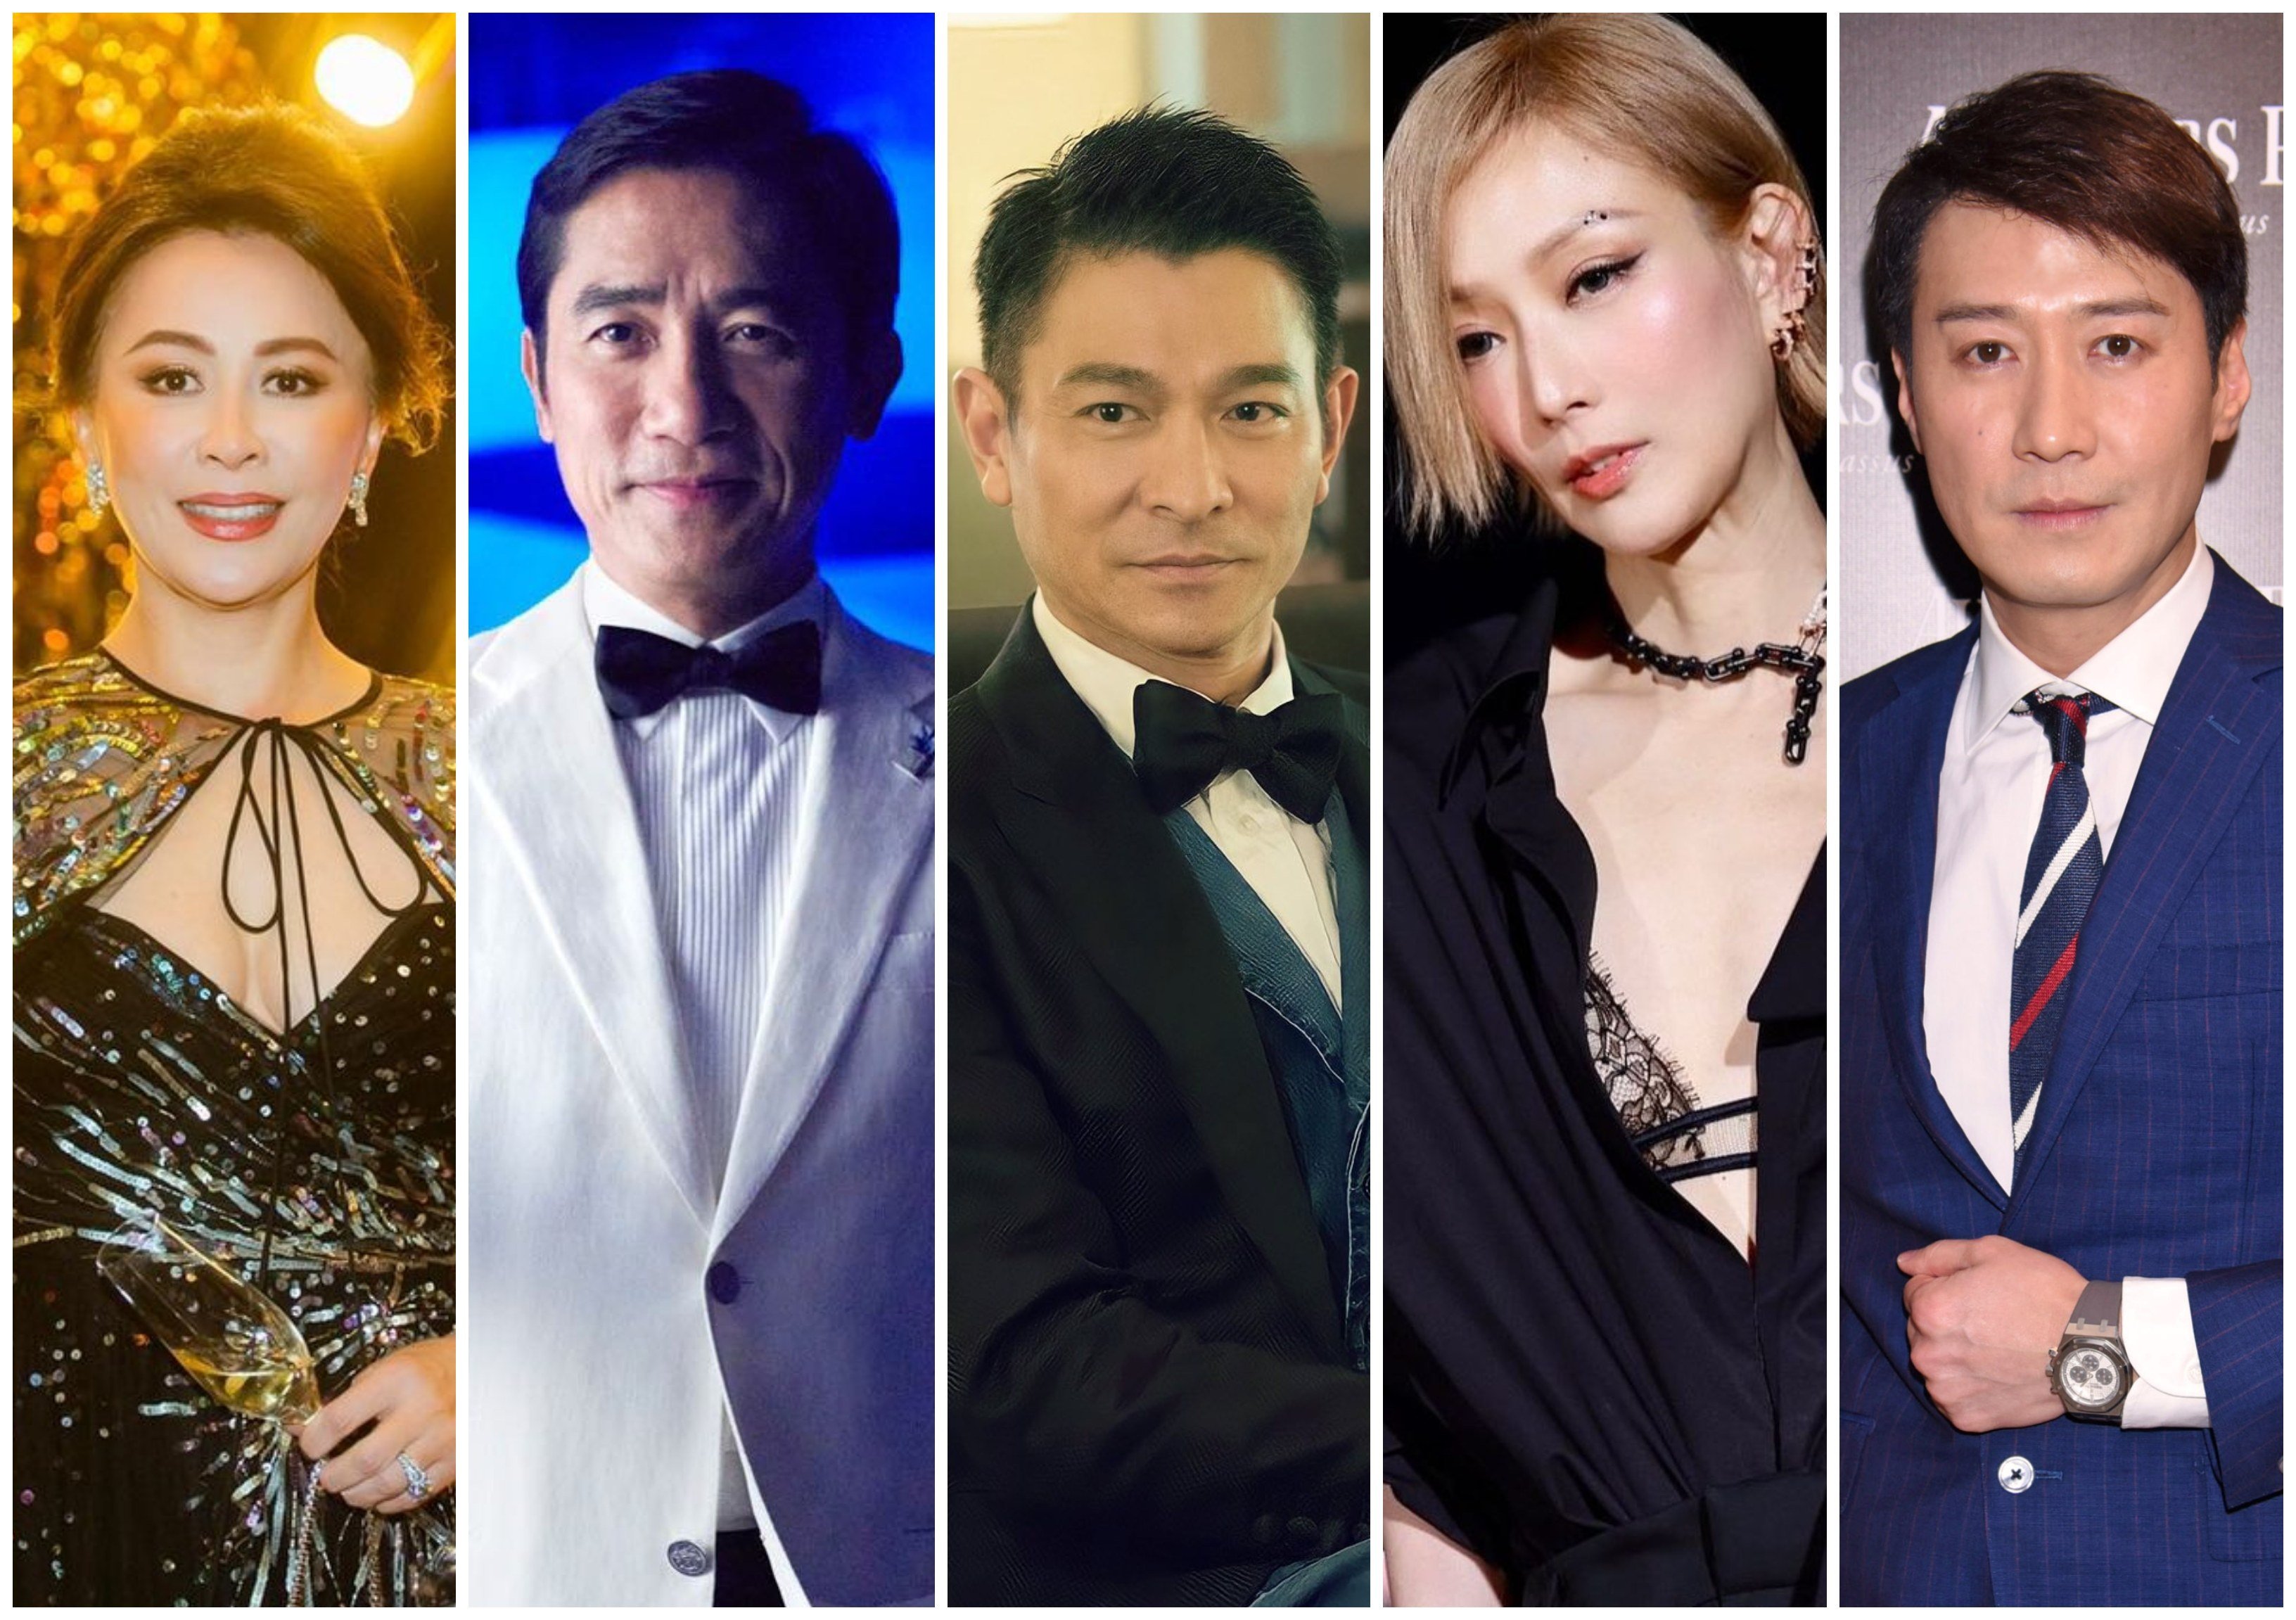 It’s been 20 years since Hong Kong’s Infernal Affairs film franchise hit the big screen ... so who’s the richest among cast members Carina Lau, Tony Leung, Andy Lau, Sammi Cheng and Leon Lai? Photos: AP; @tonyleung_official, @sammi_chengsauman, @carinalau1208/Instagram; SCMP